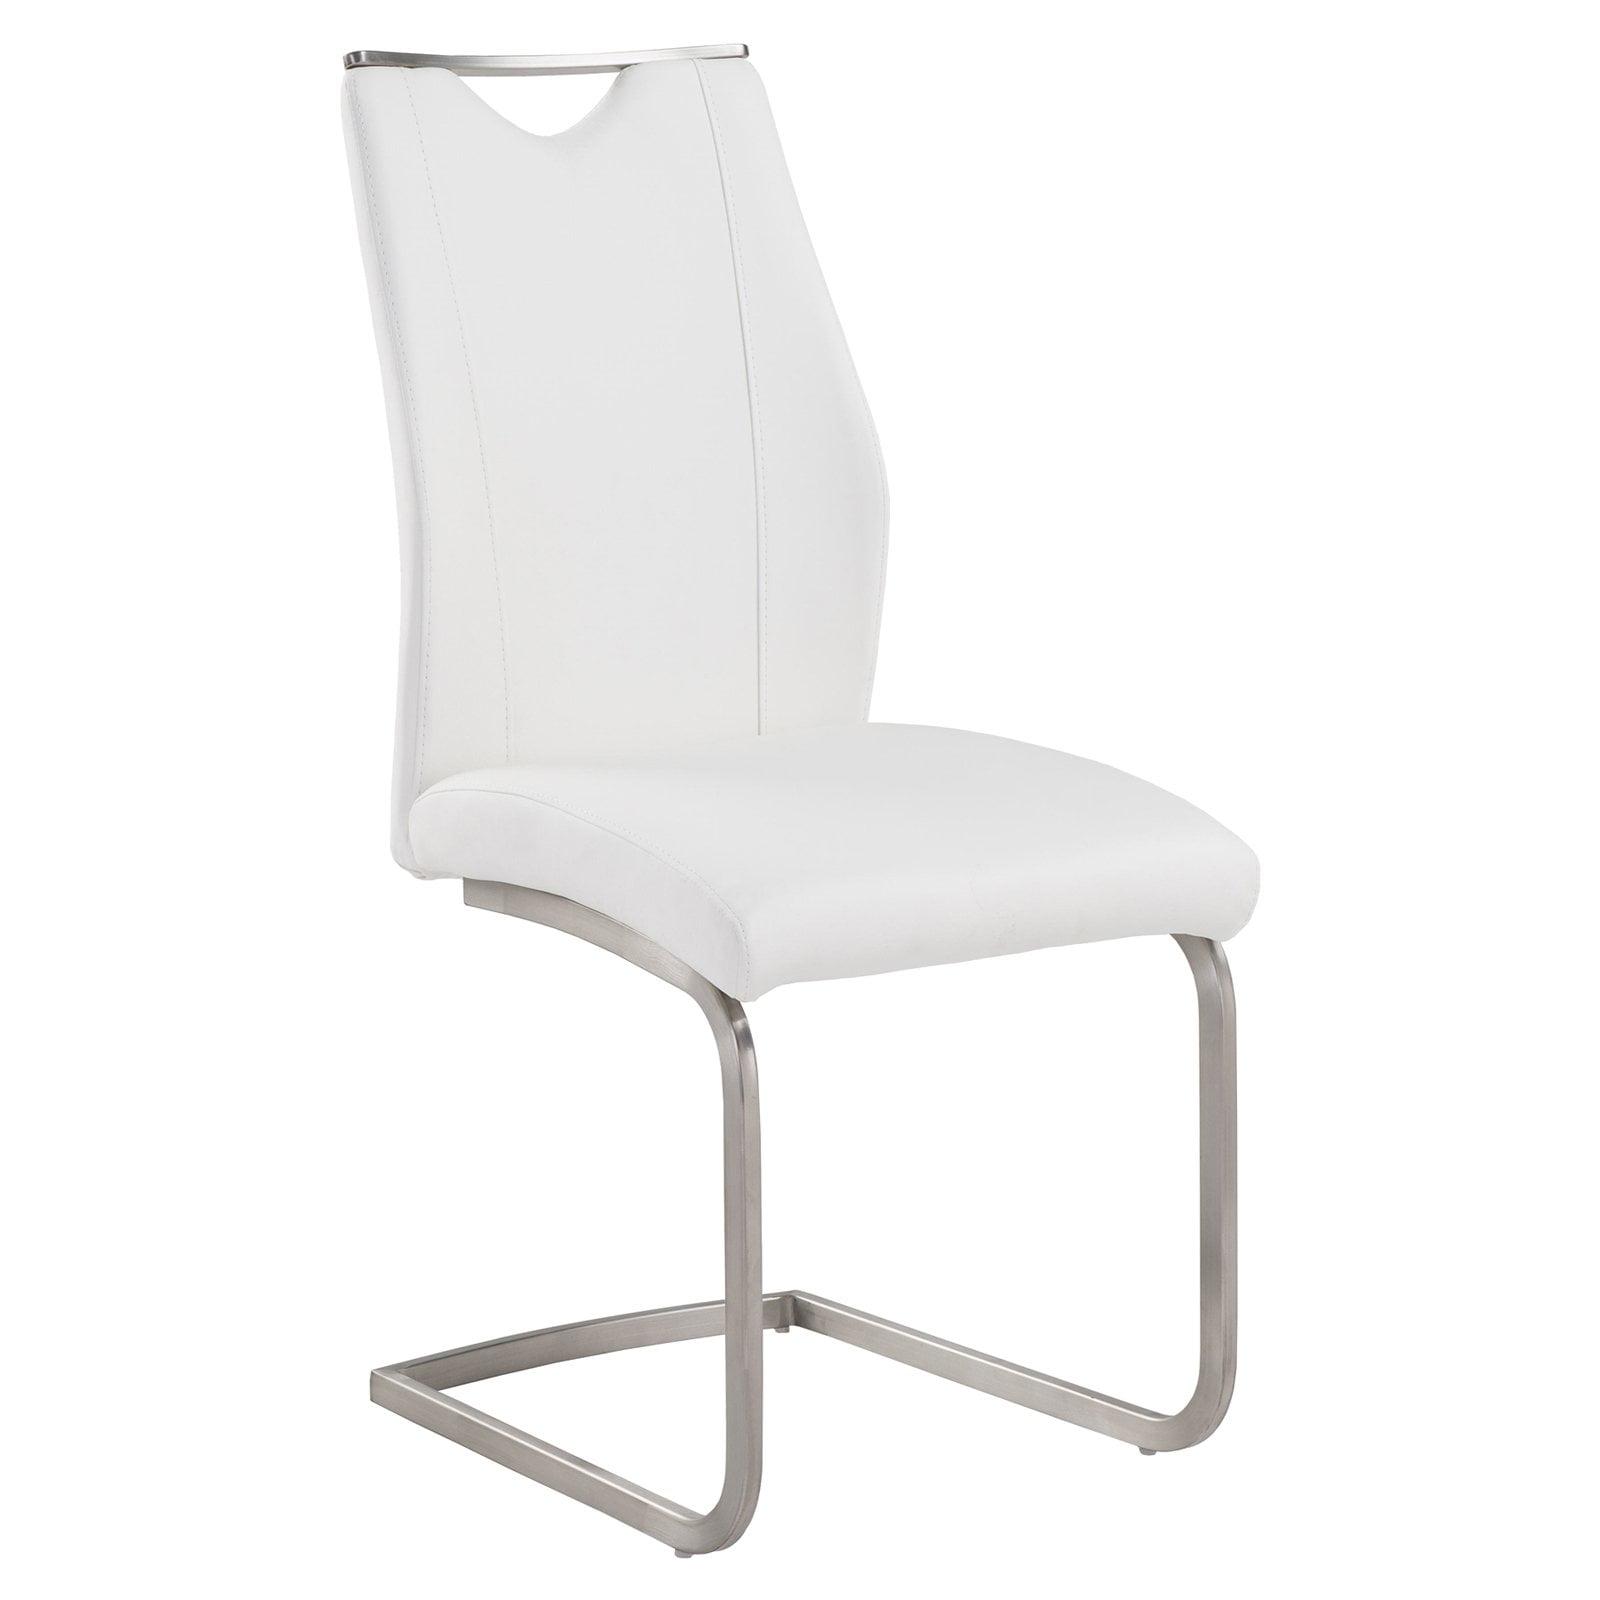 Sleek White Faux Leather & Stainless Steel Side Chair